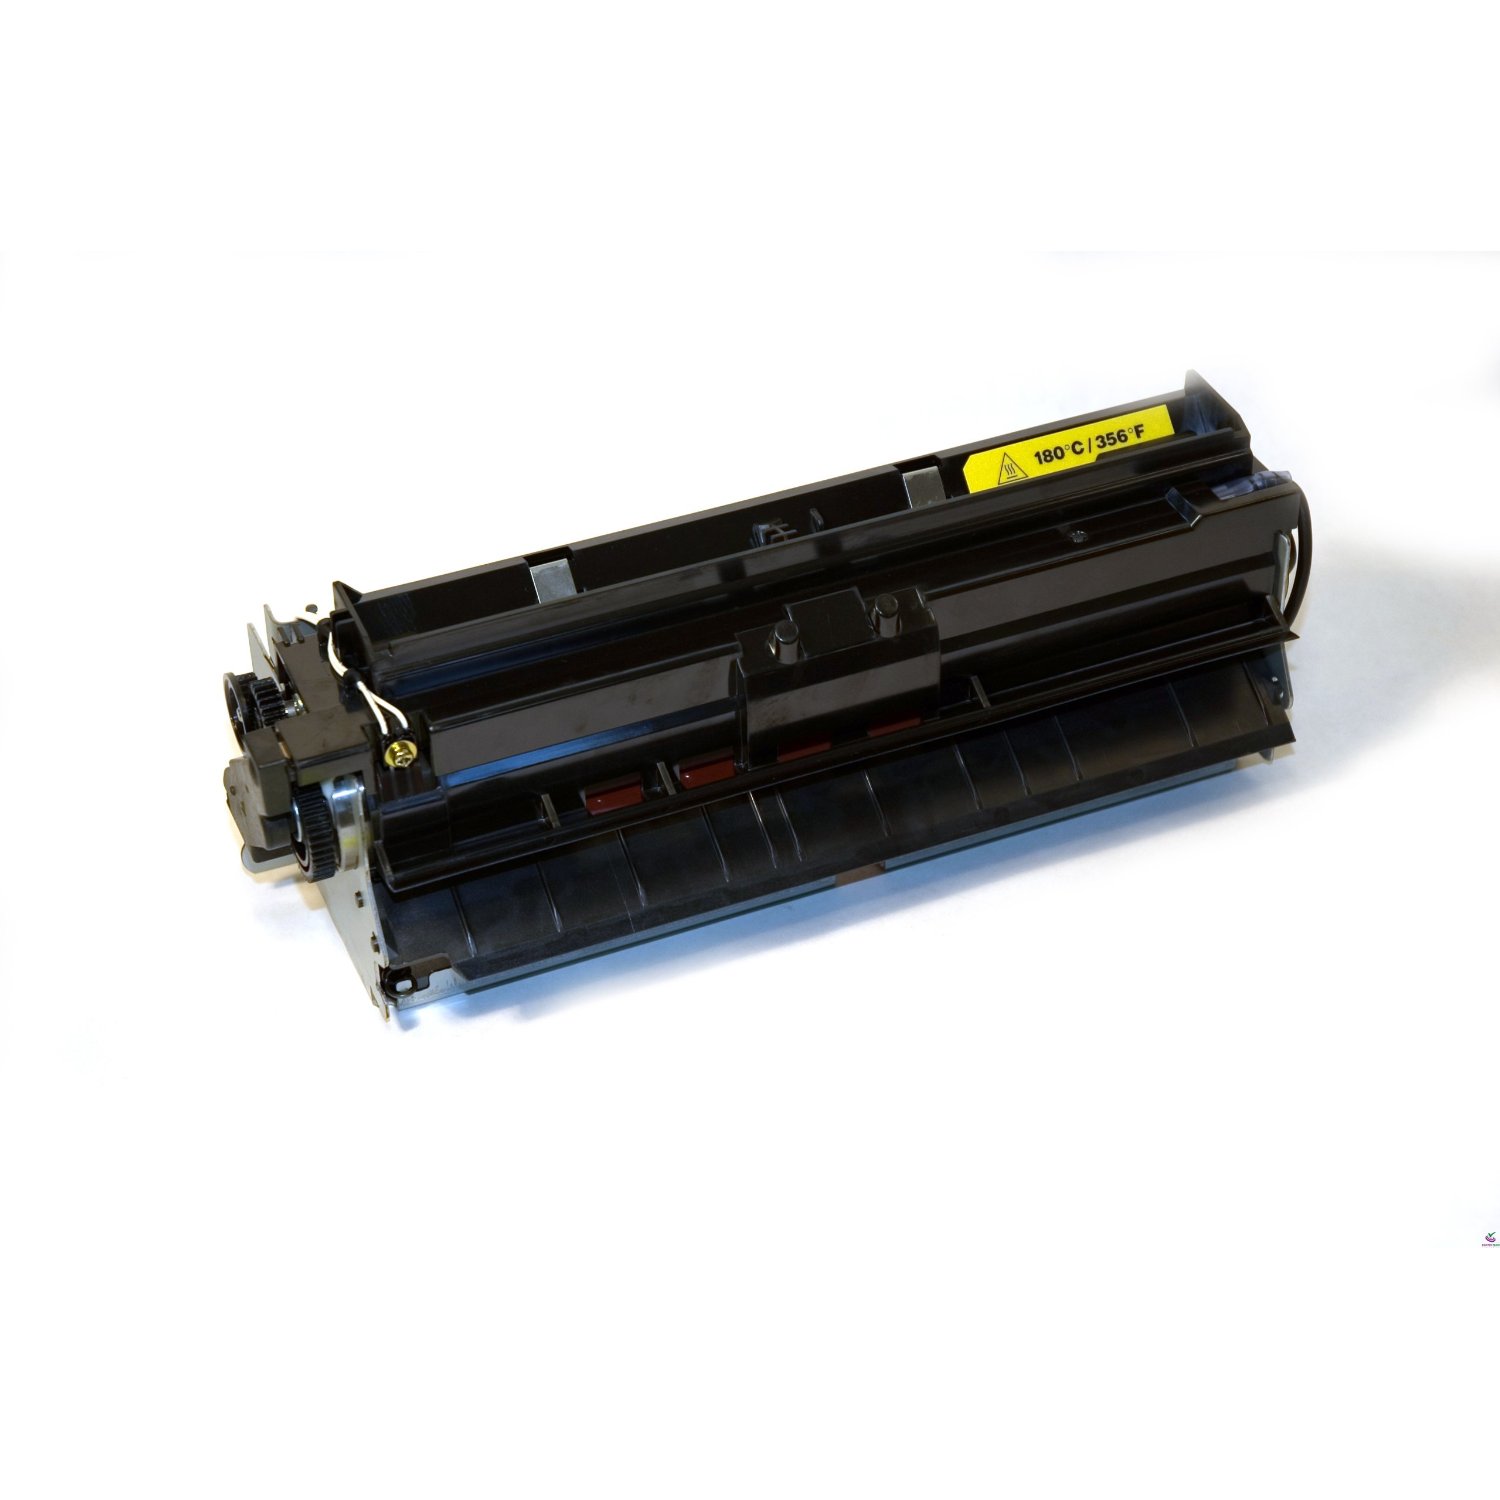 Lexmark T630/T632 T630 12A7465: Lexmark High Yield Remanufactured Black Toner Cartridge for T630/632/634 and X630/632 Series